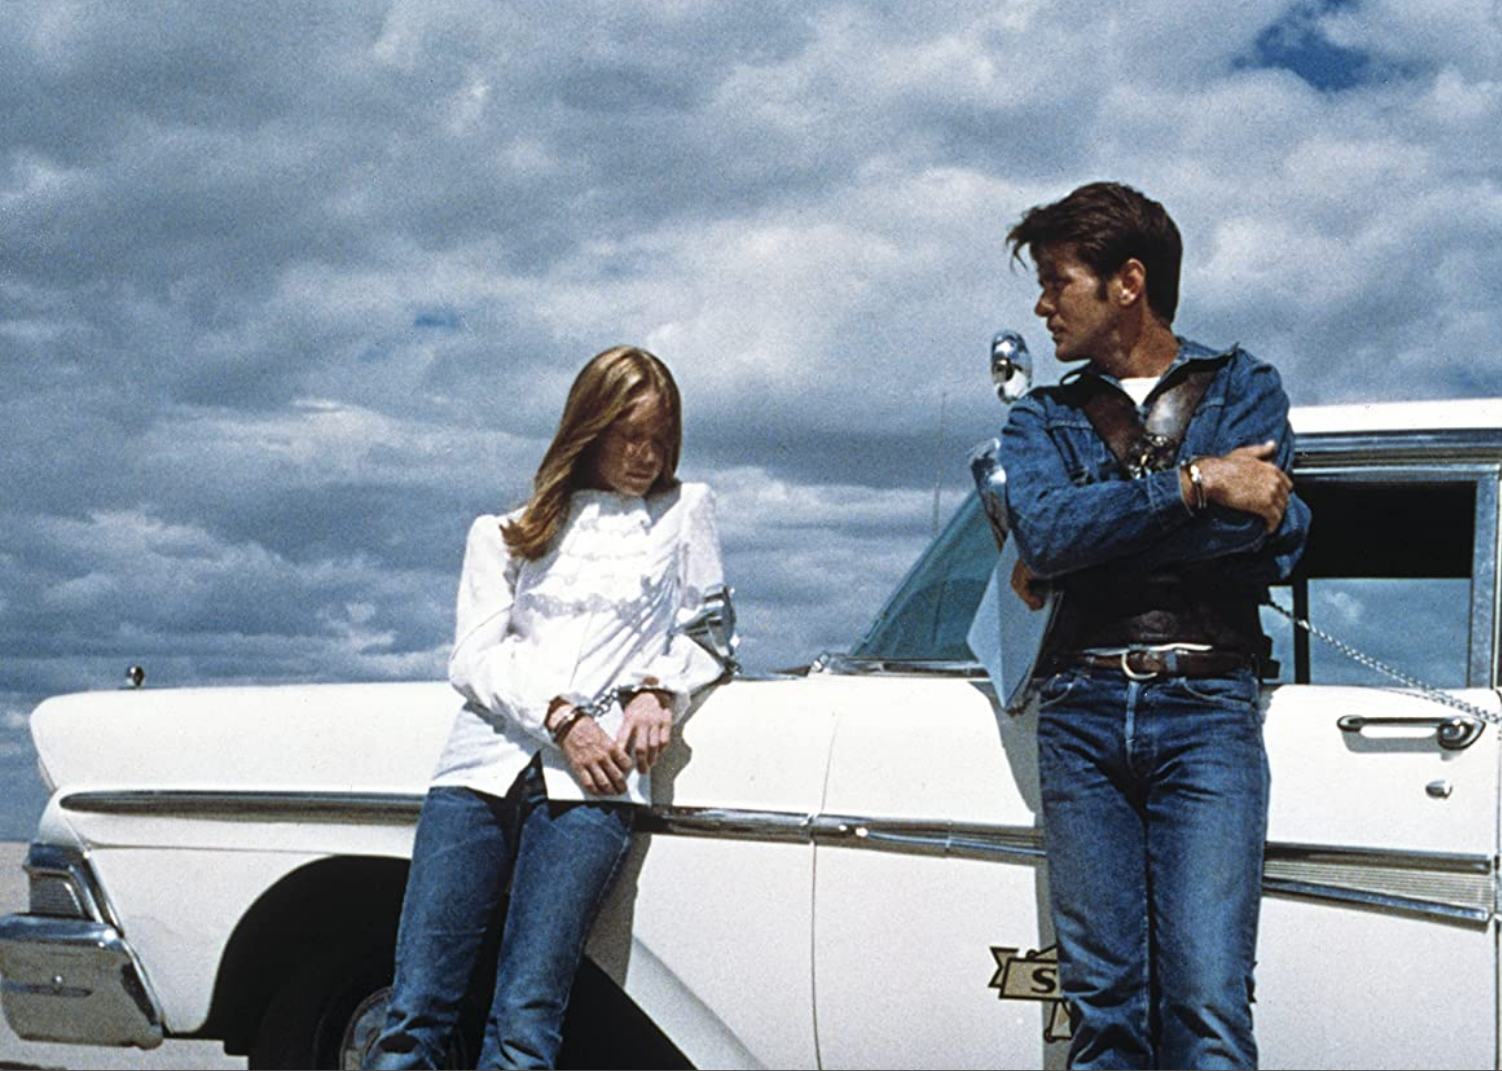 Martin Sheen and Sissy Spacek in a scene from "Badlands".